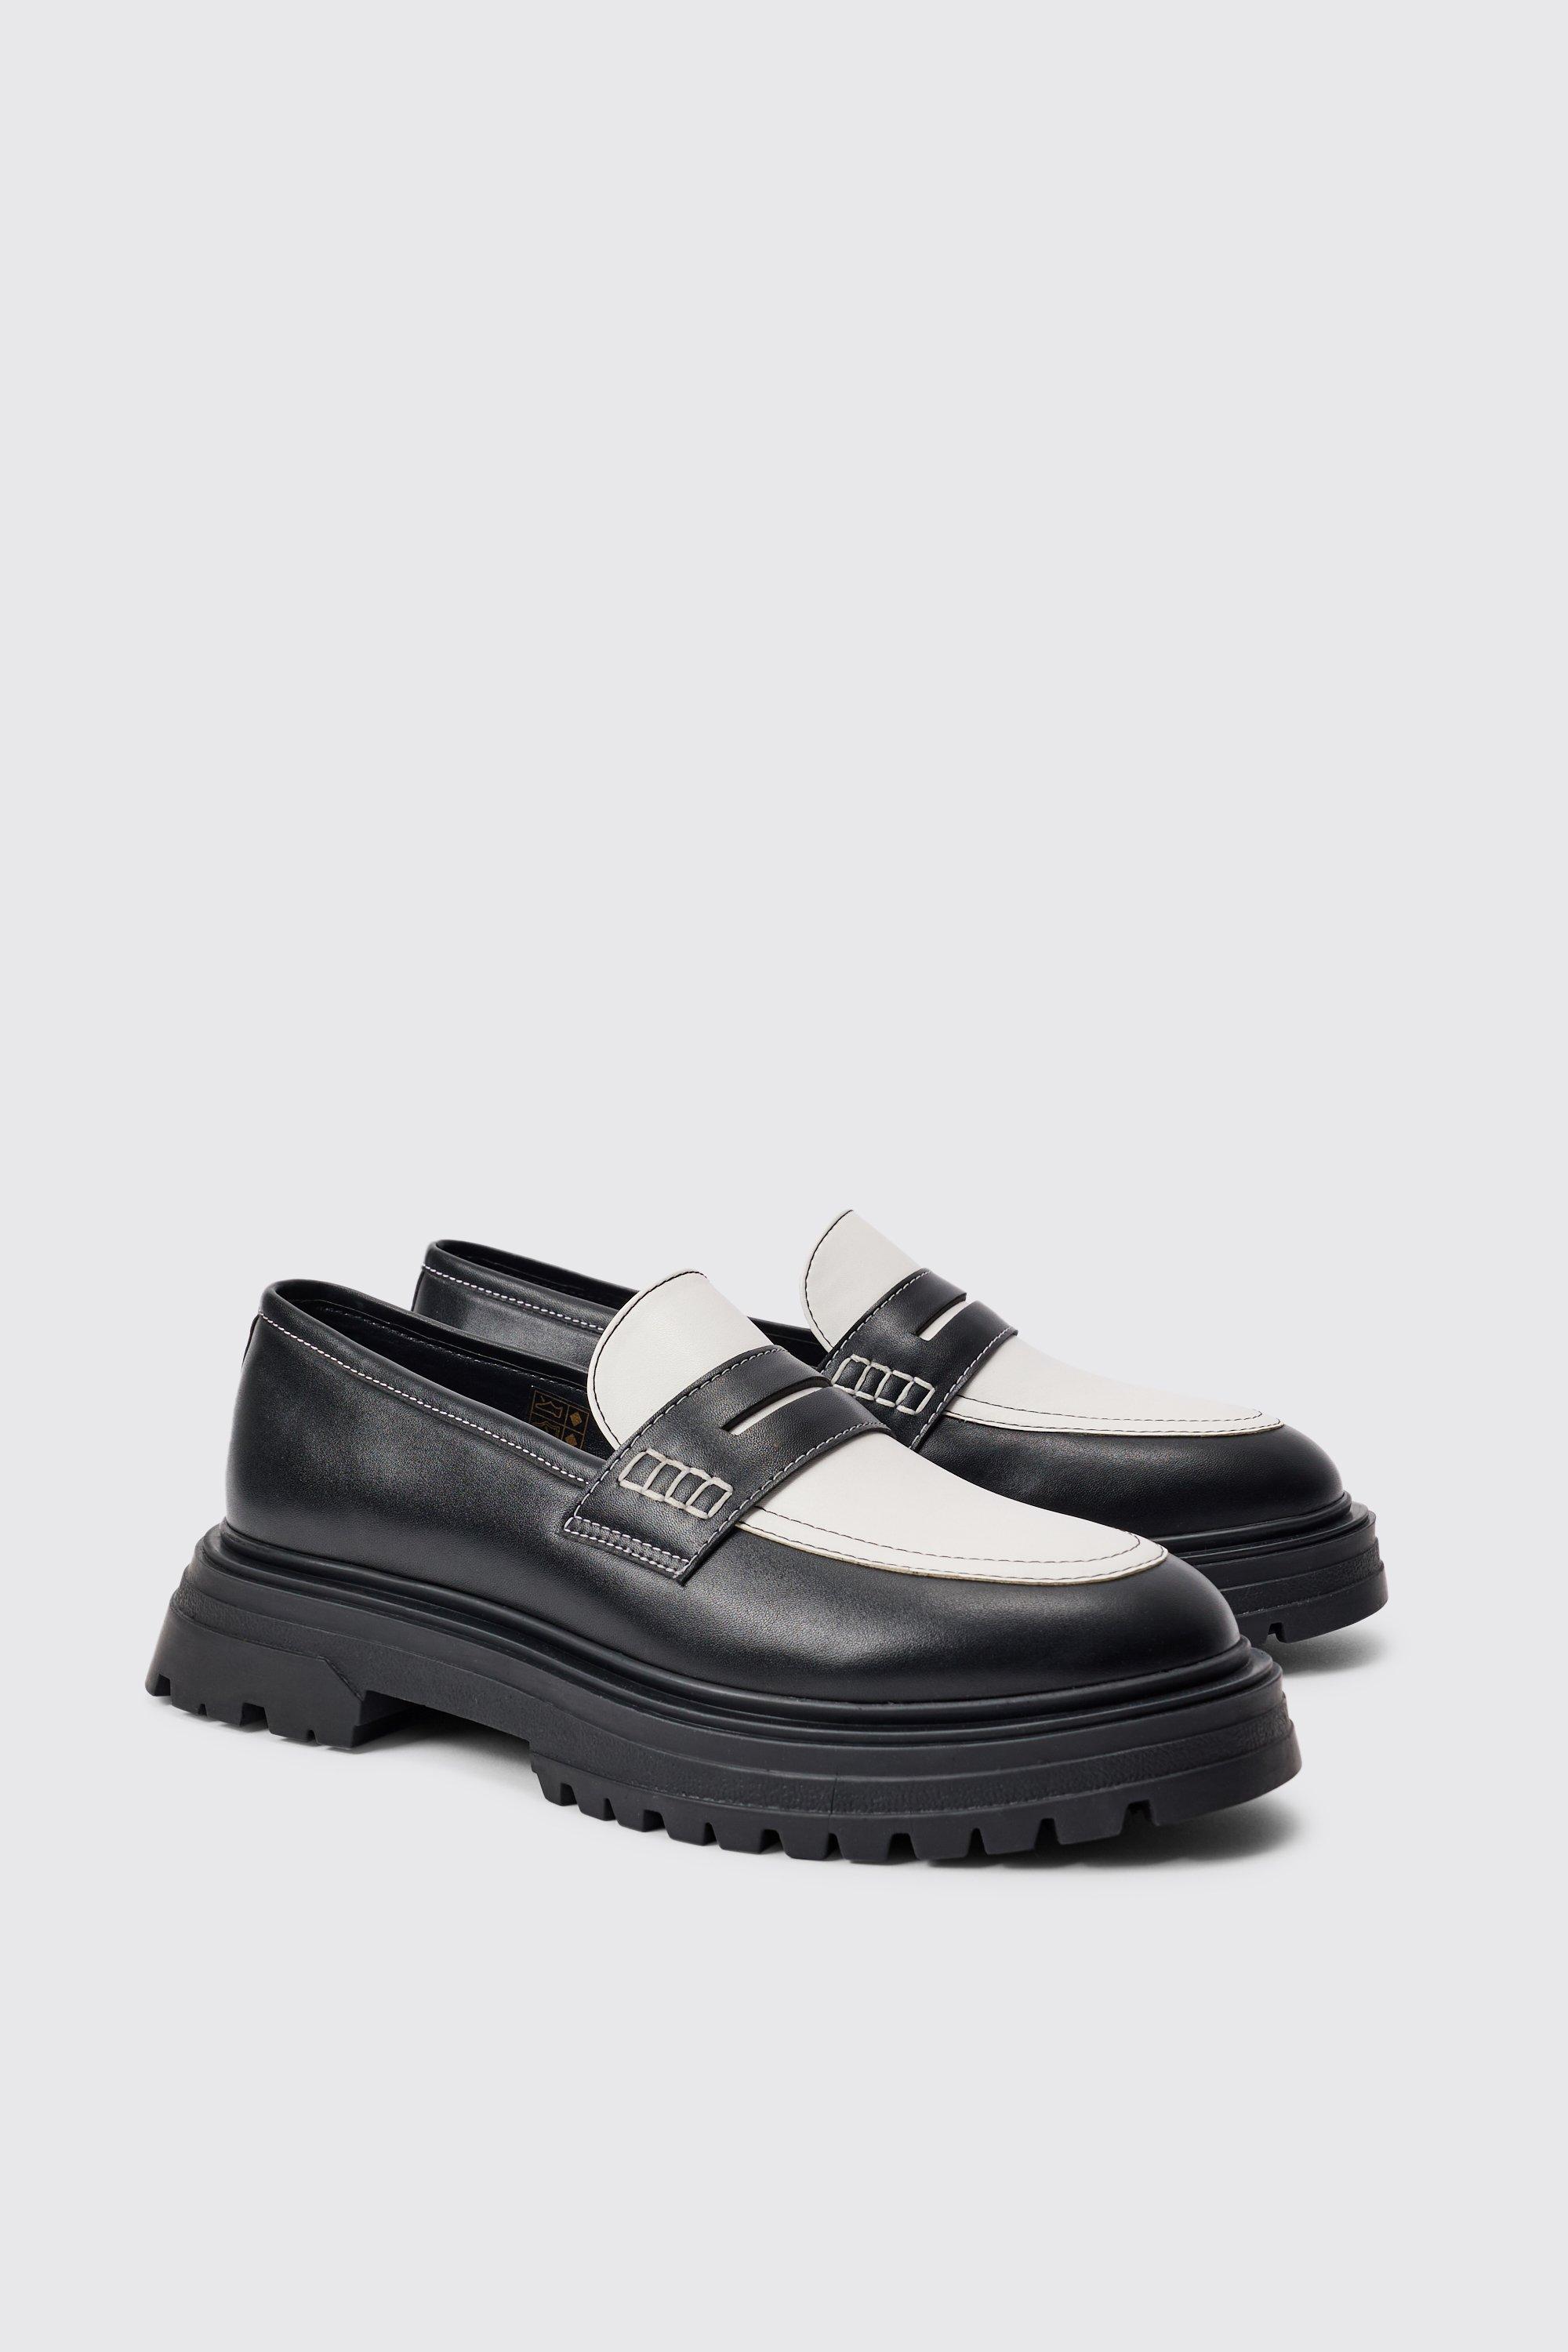 Image of Pu Slip On Contrast Chunky Loafer In Black, Nero